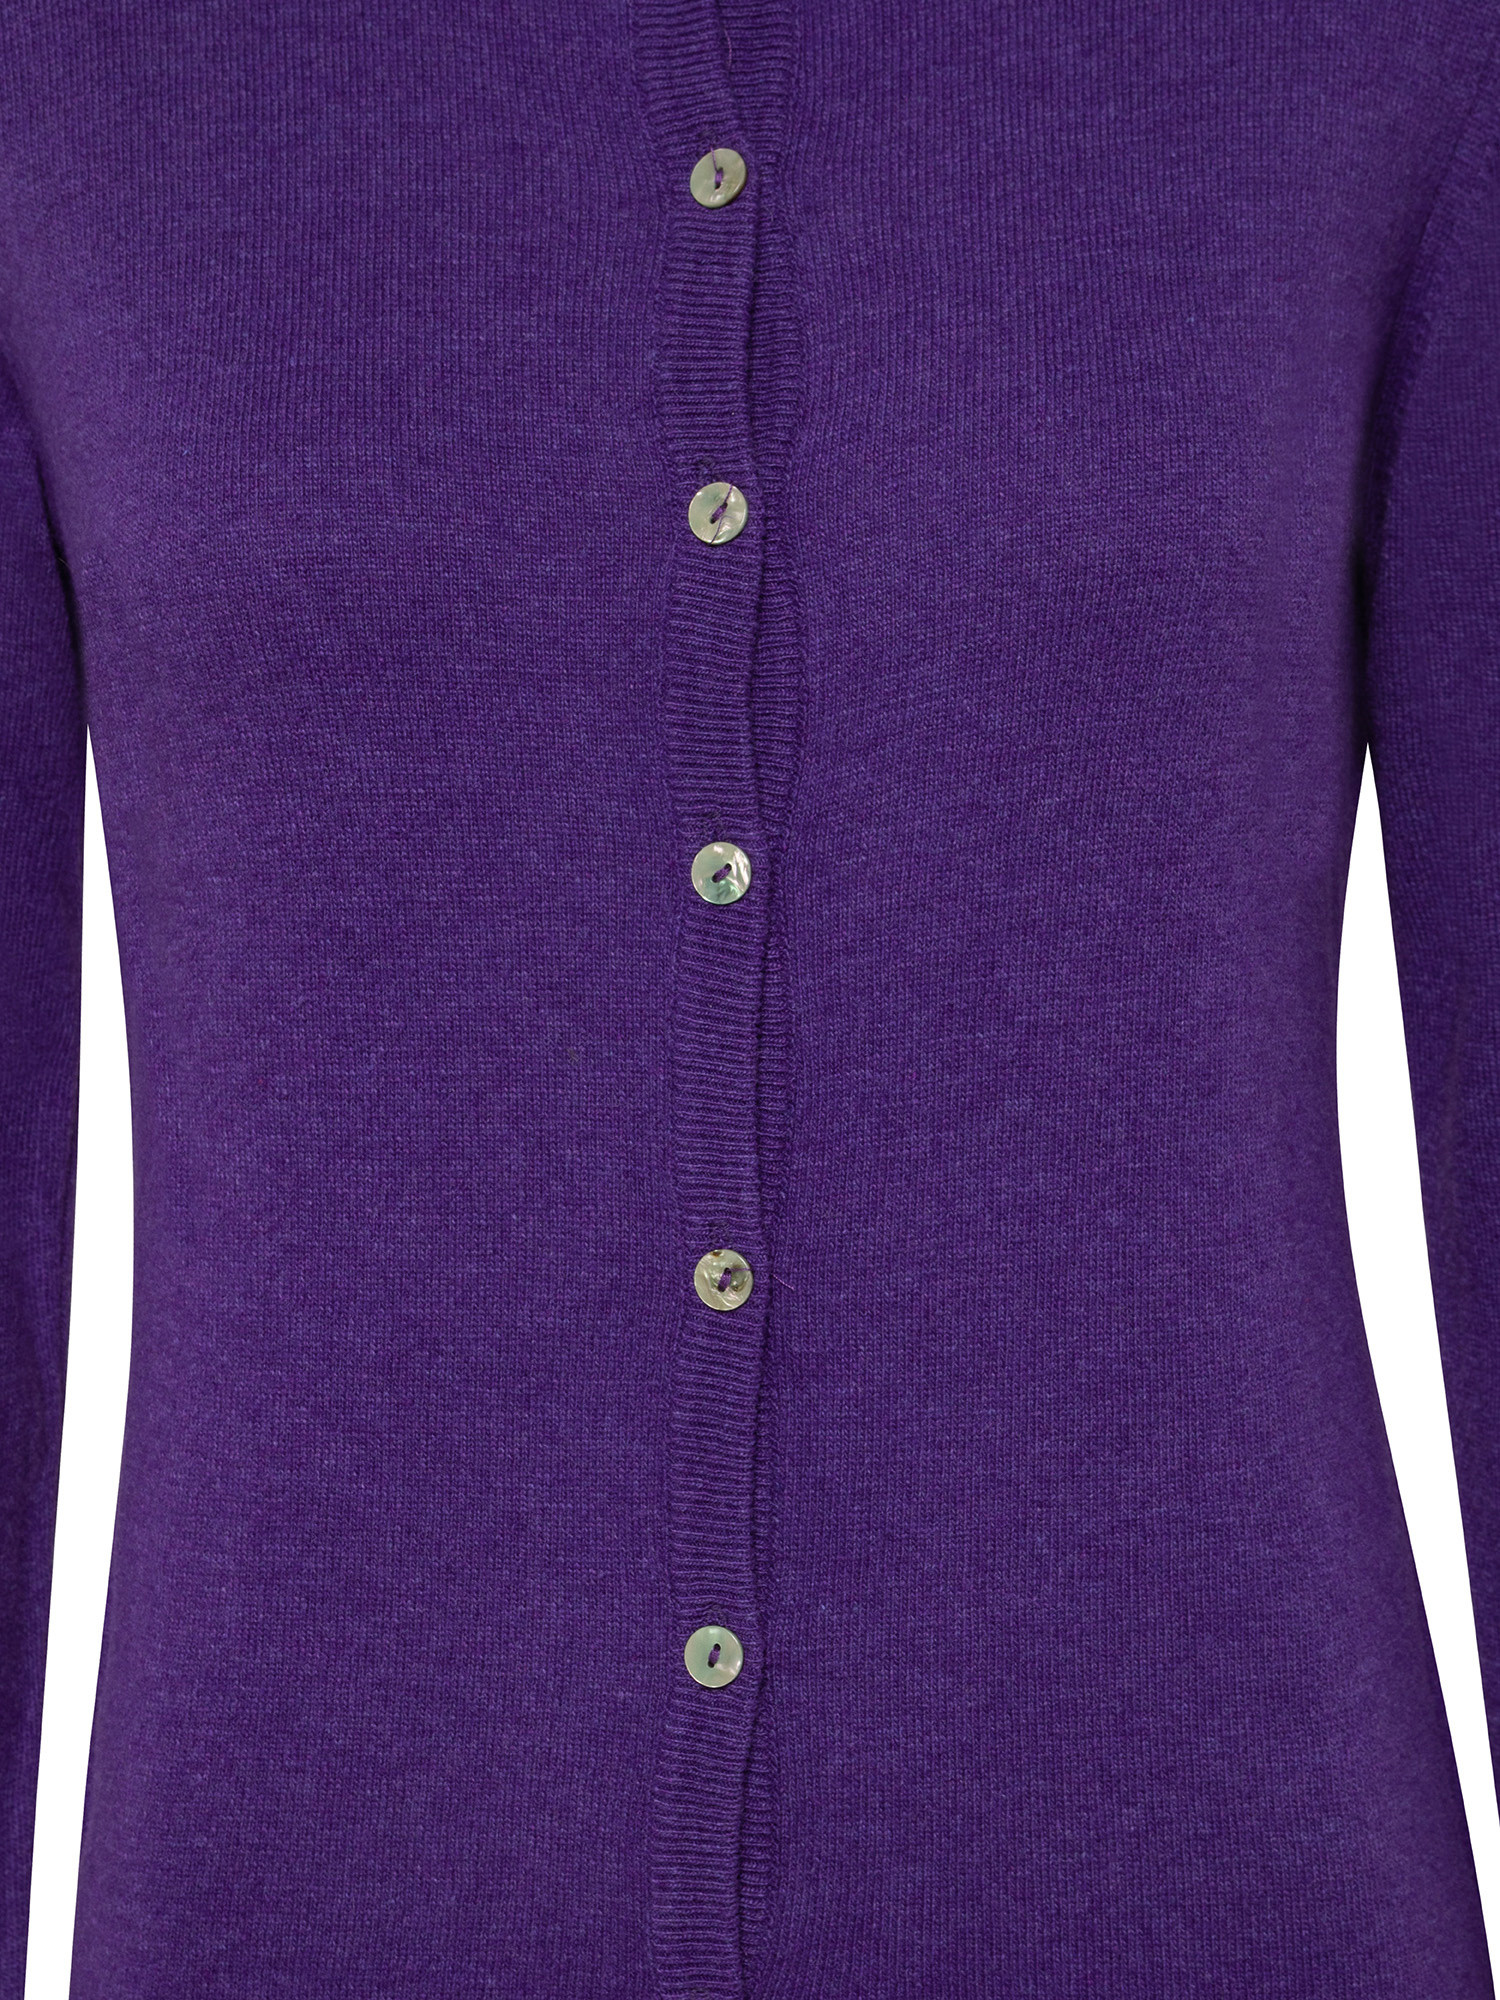 K Collection - Cardigan, Purple, large image number 2